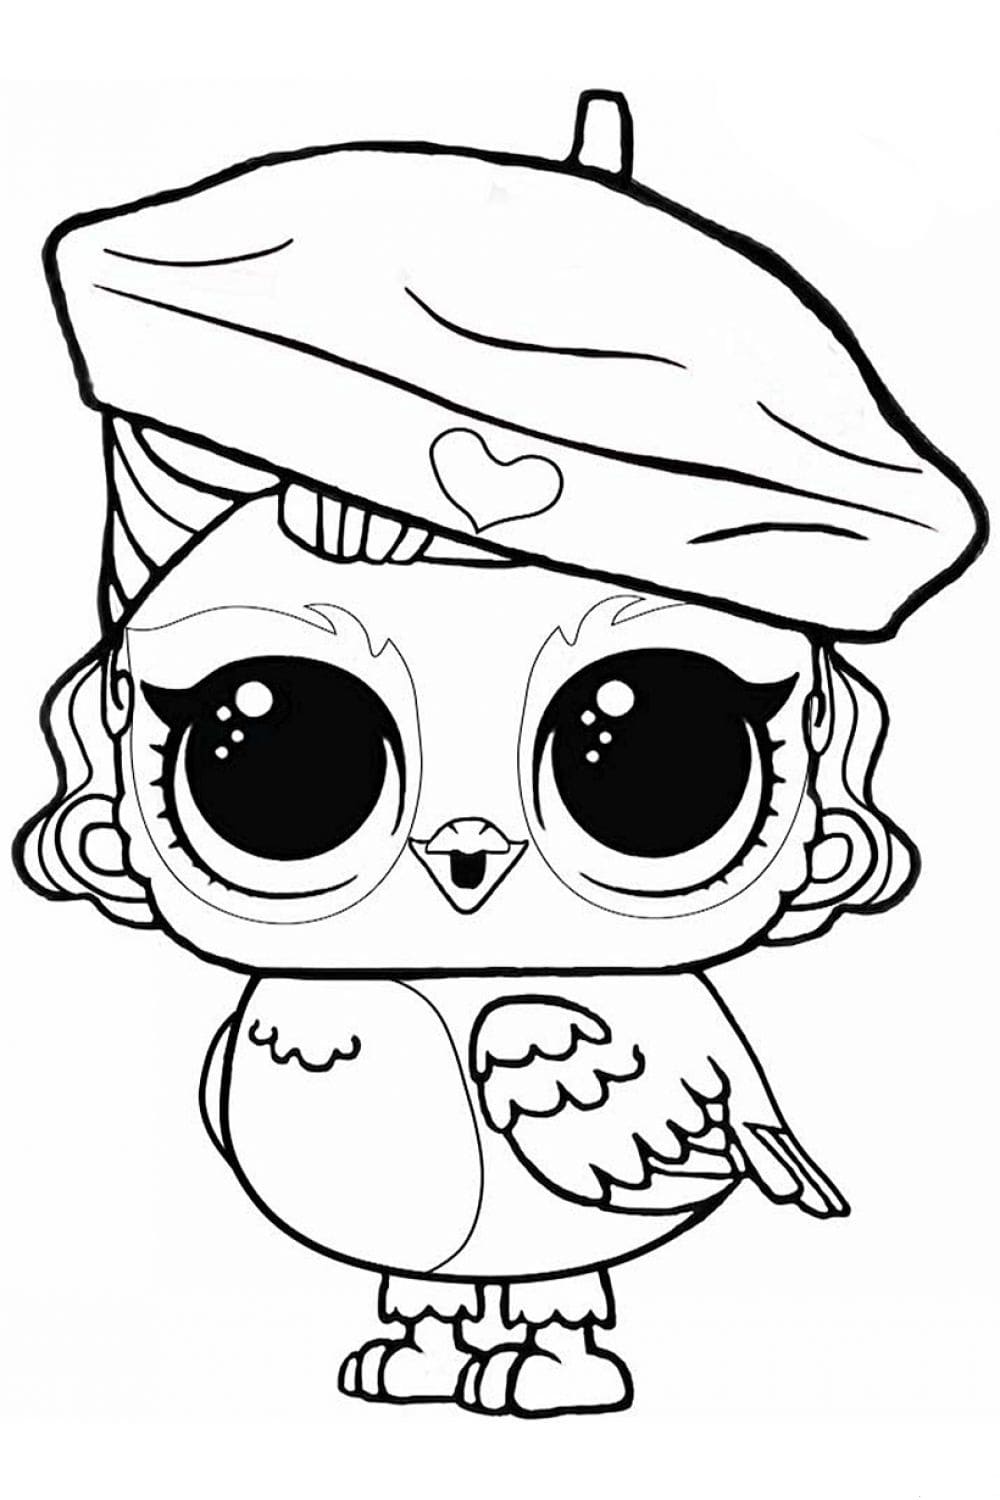 LOL Pets Coloring Pages. 25 Images Free Printable